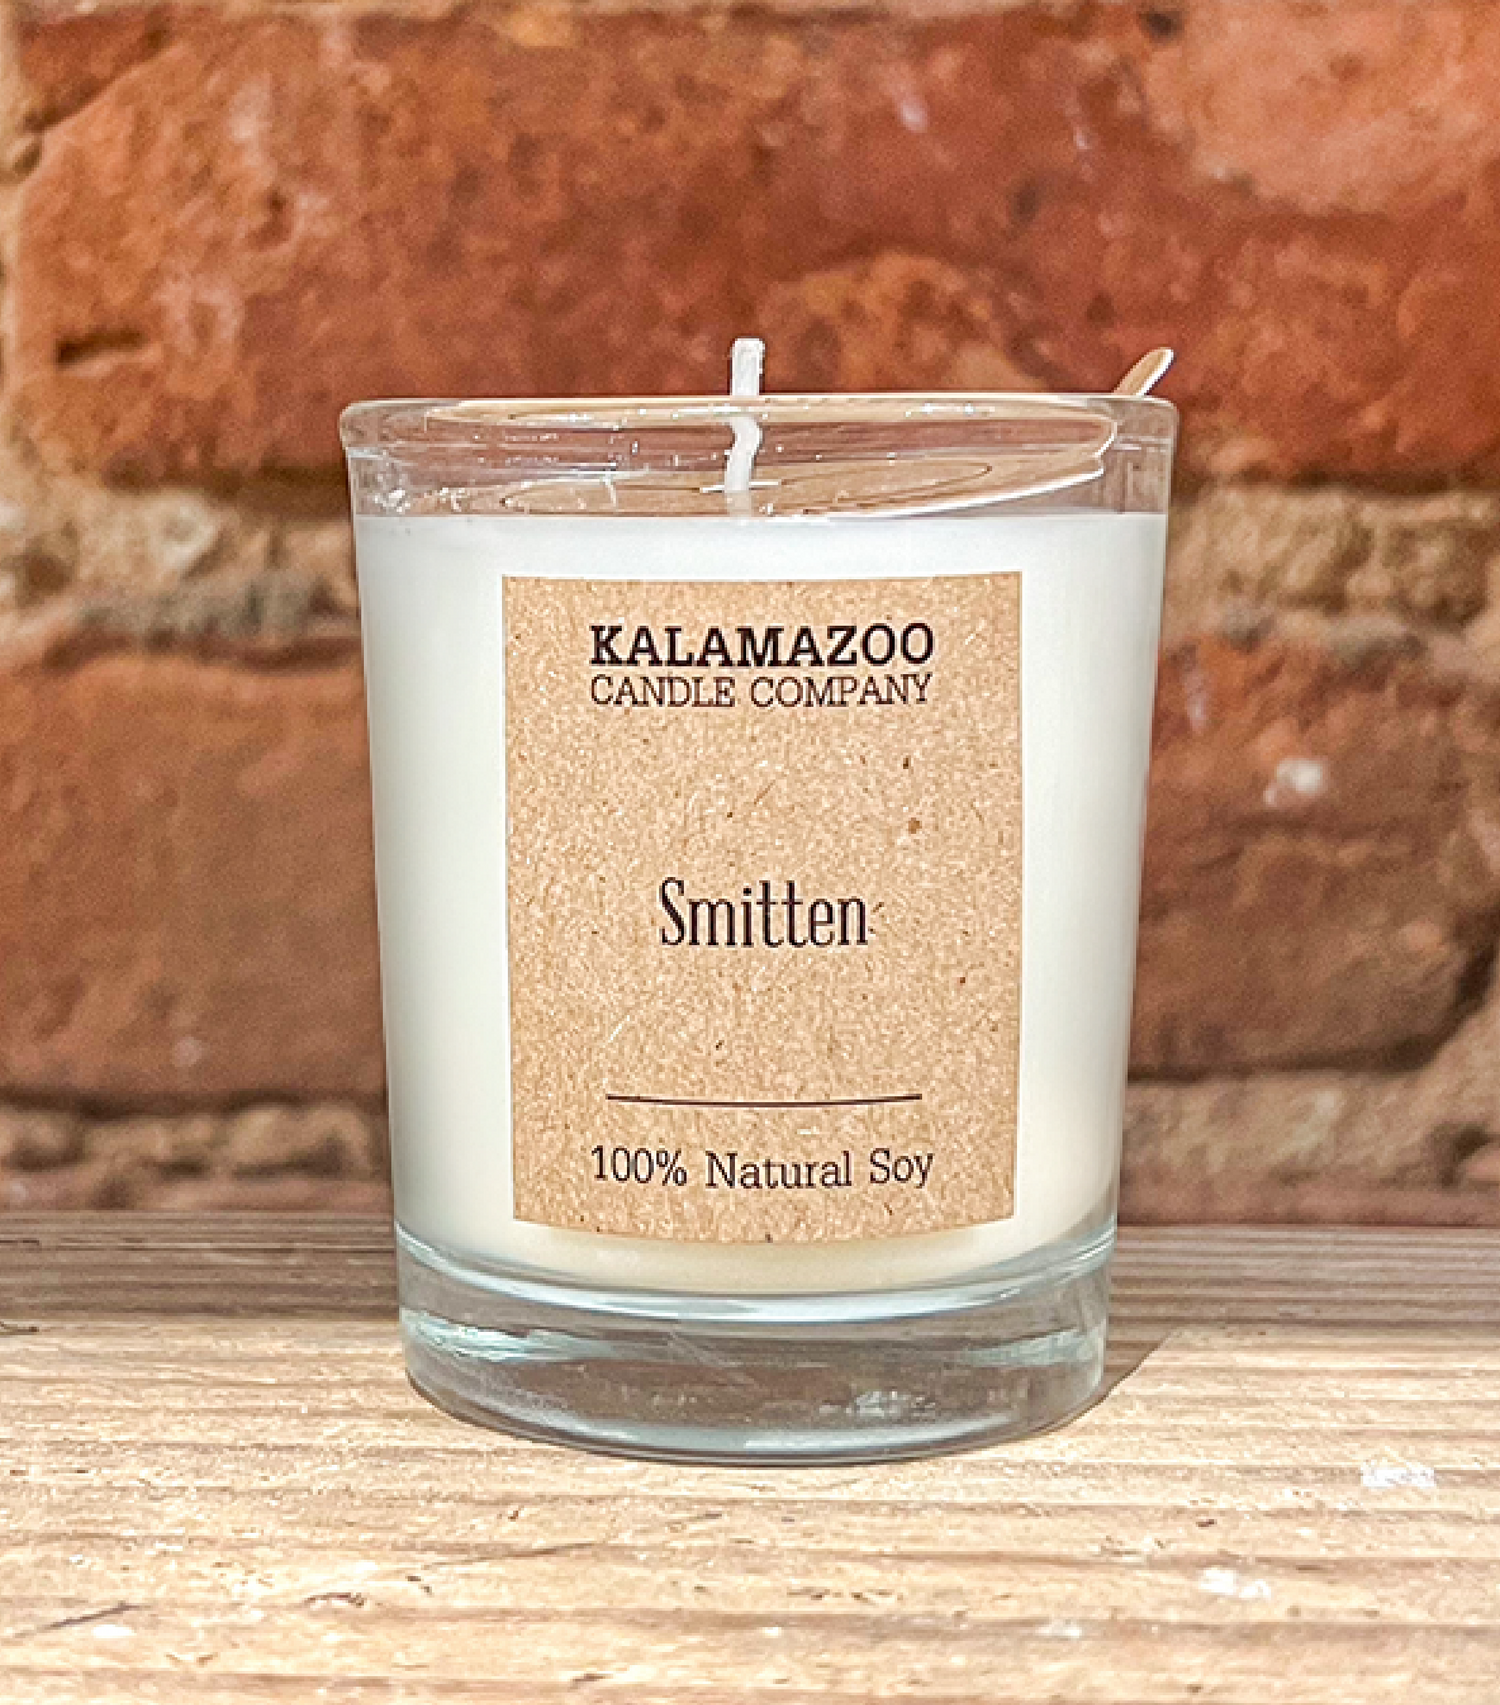 Smitten Candles A soft, sweet blend of floaty florls, sparkling citrus and creamy vanilla, this classic soy candle smells like sunshine daydreams. All Kalamazoo Candles are: 100% natural scented soy wax; produced using locally sourced and American-made ma